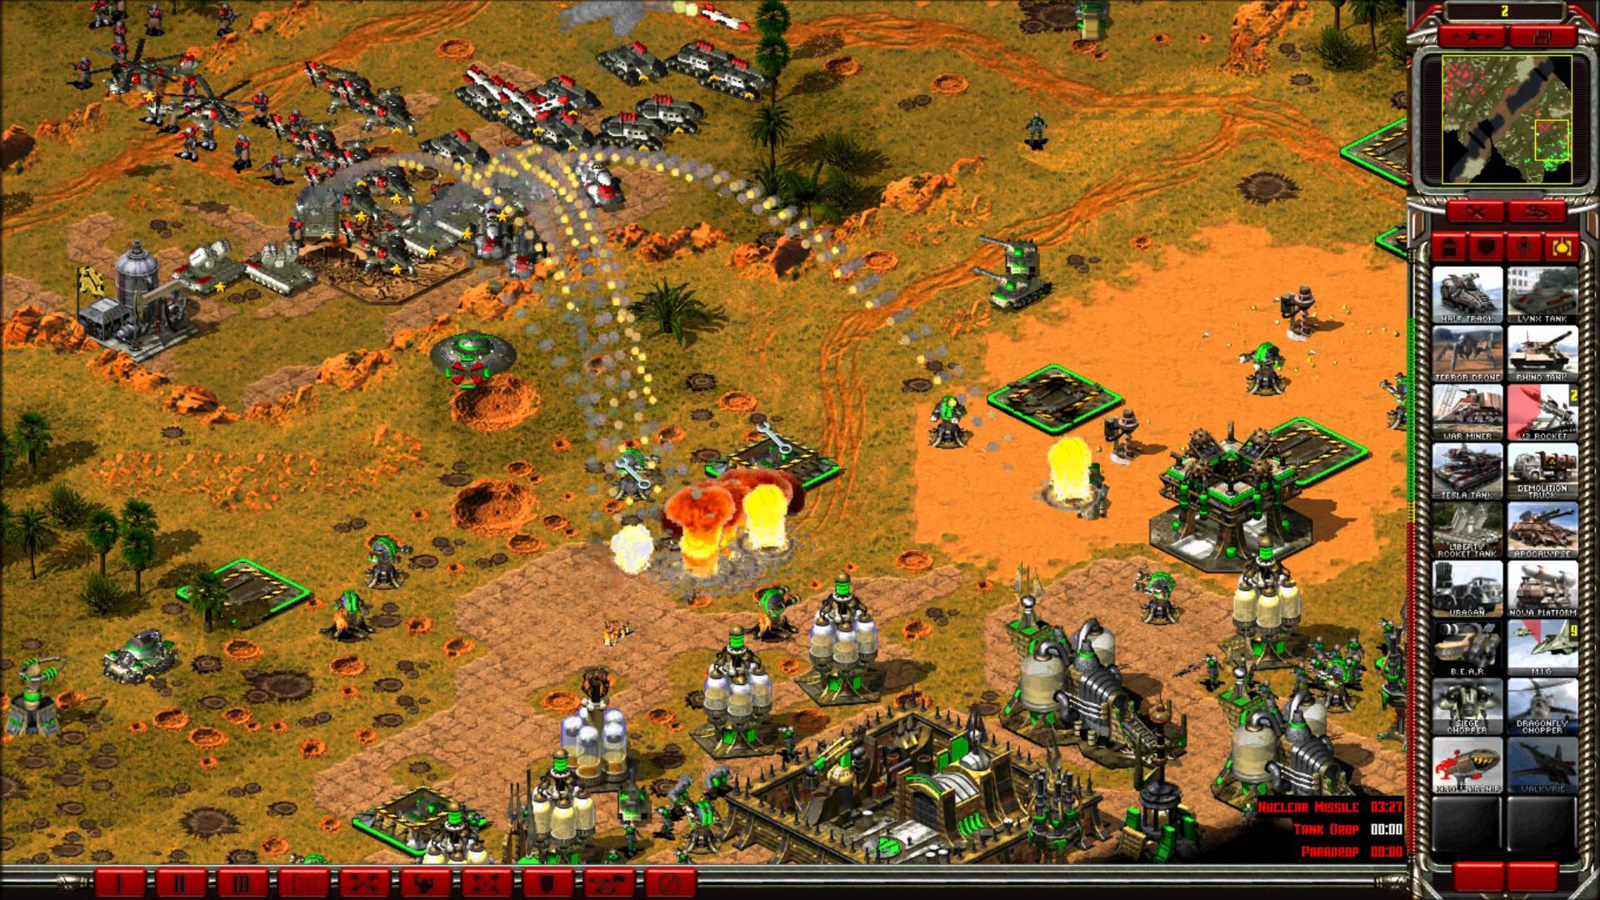 Command Conquer Red Alert 1. Command & Conquer: Red Alert 2. Стратегия Red Alert 1. Command & Conquer: Red Alert 2 Westwood Studios. Старые игры на пк 1990 2000